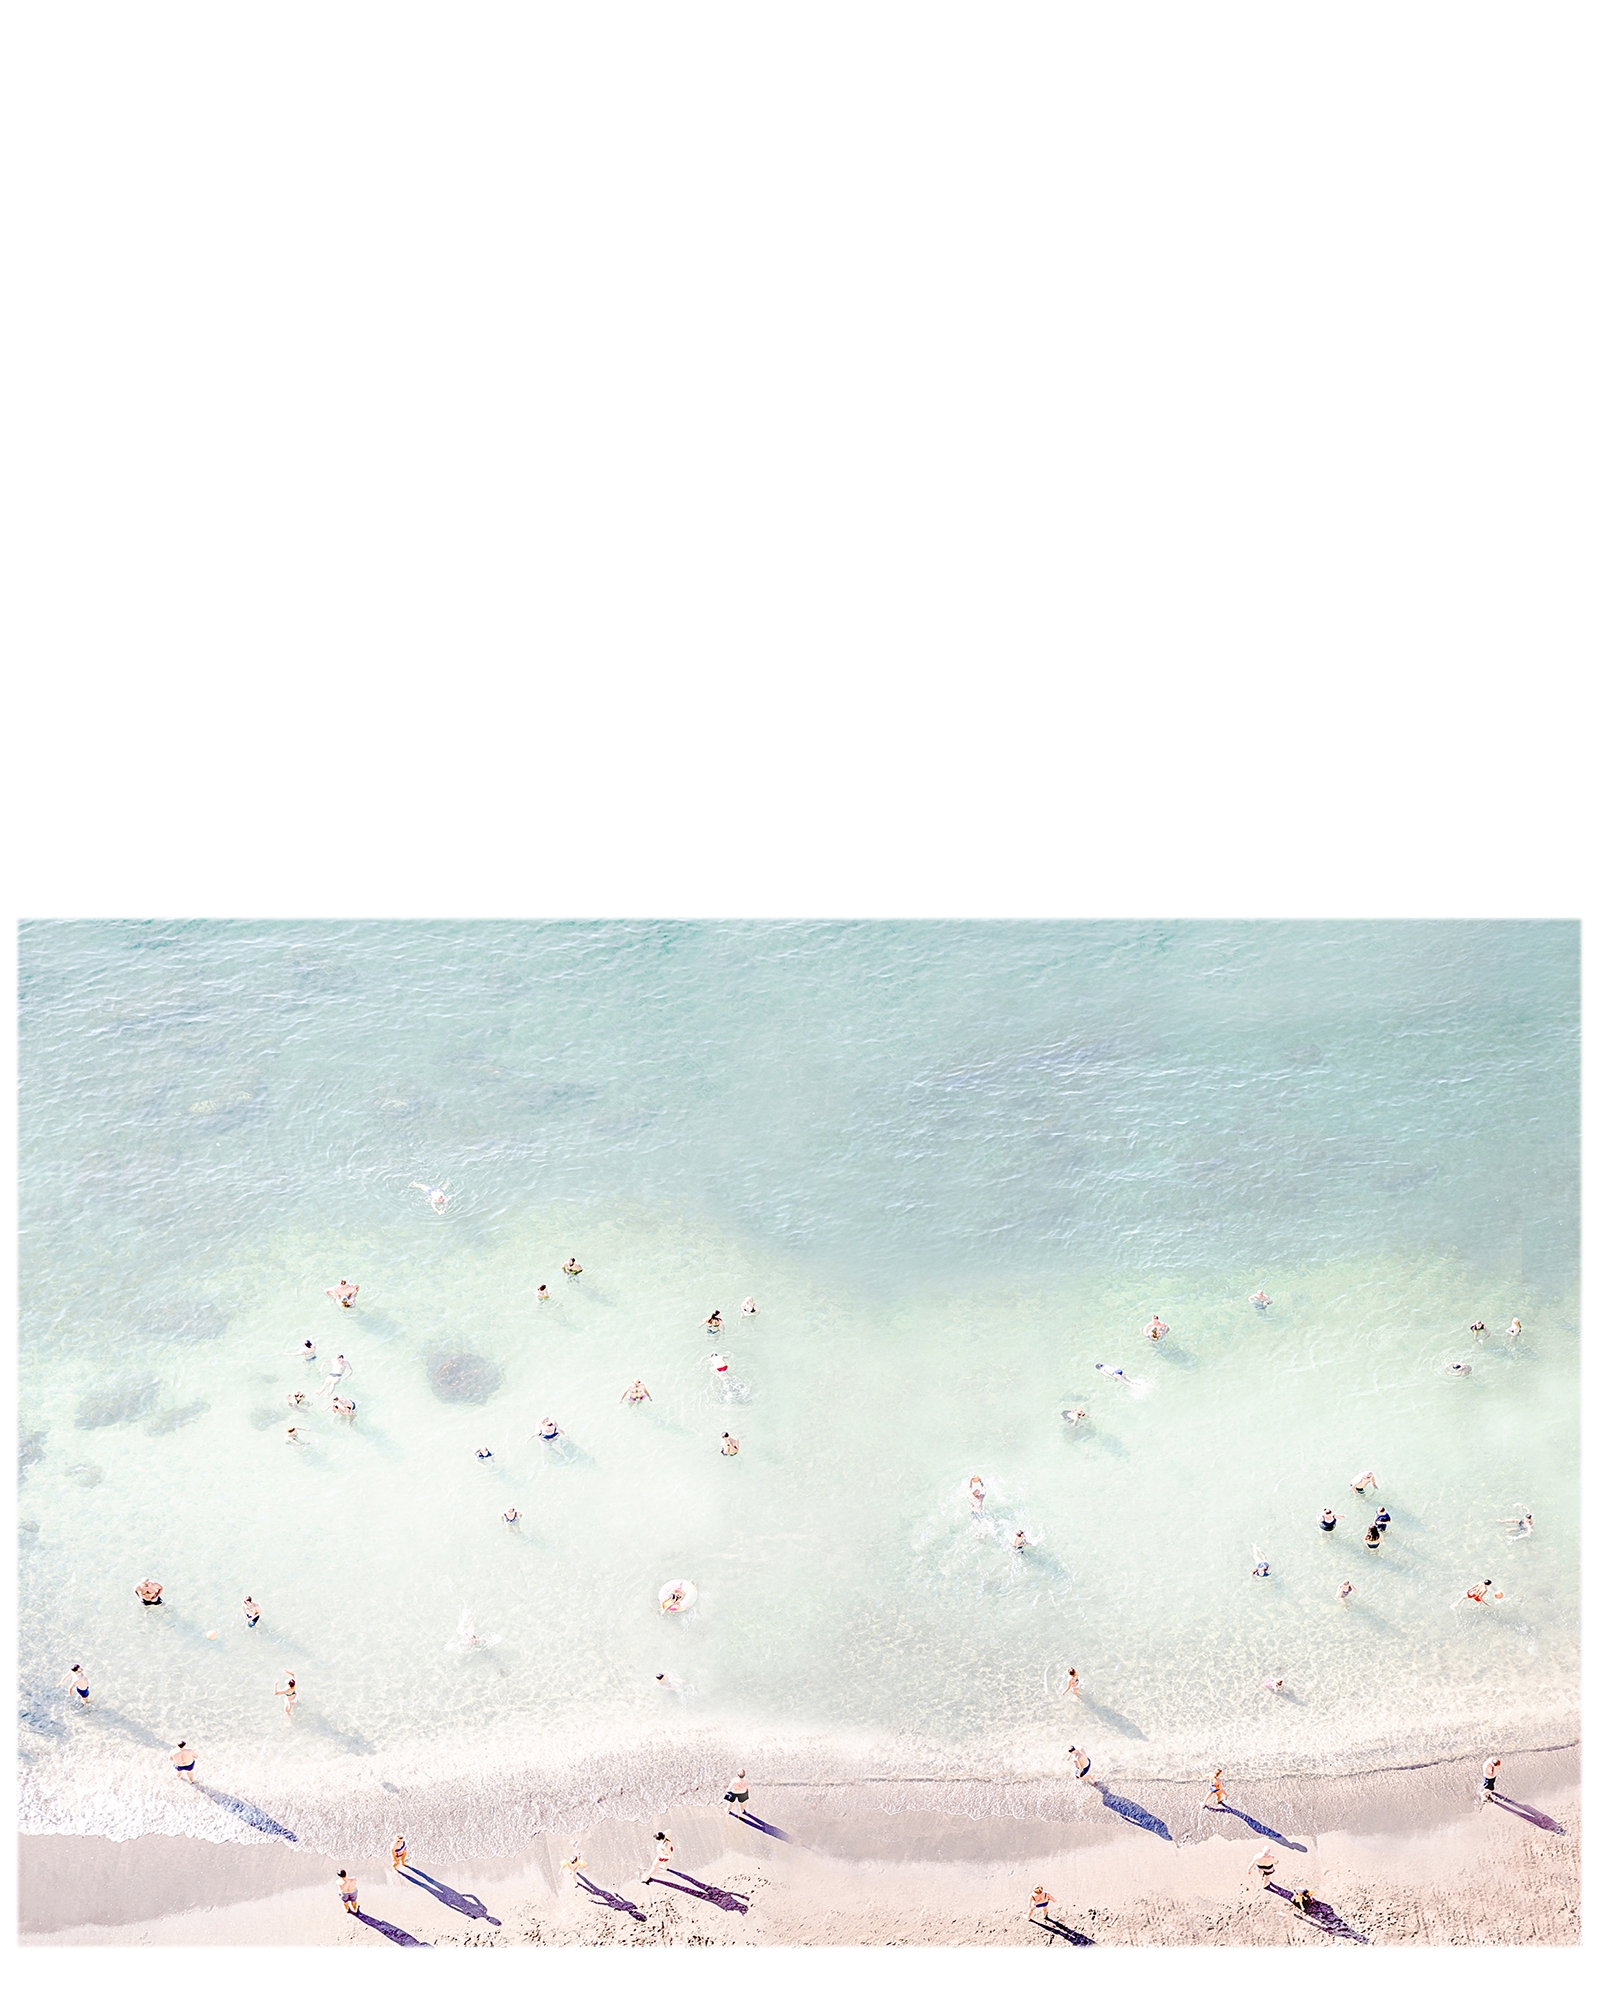 “Day at the Beach Club” by Caroline Pacula - Image 0